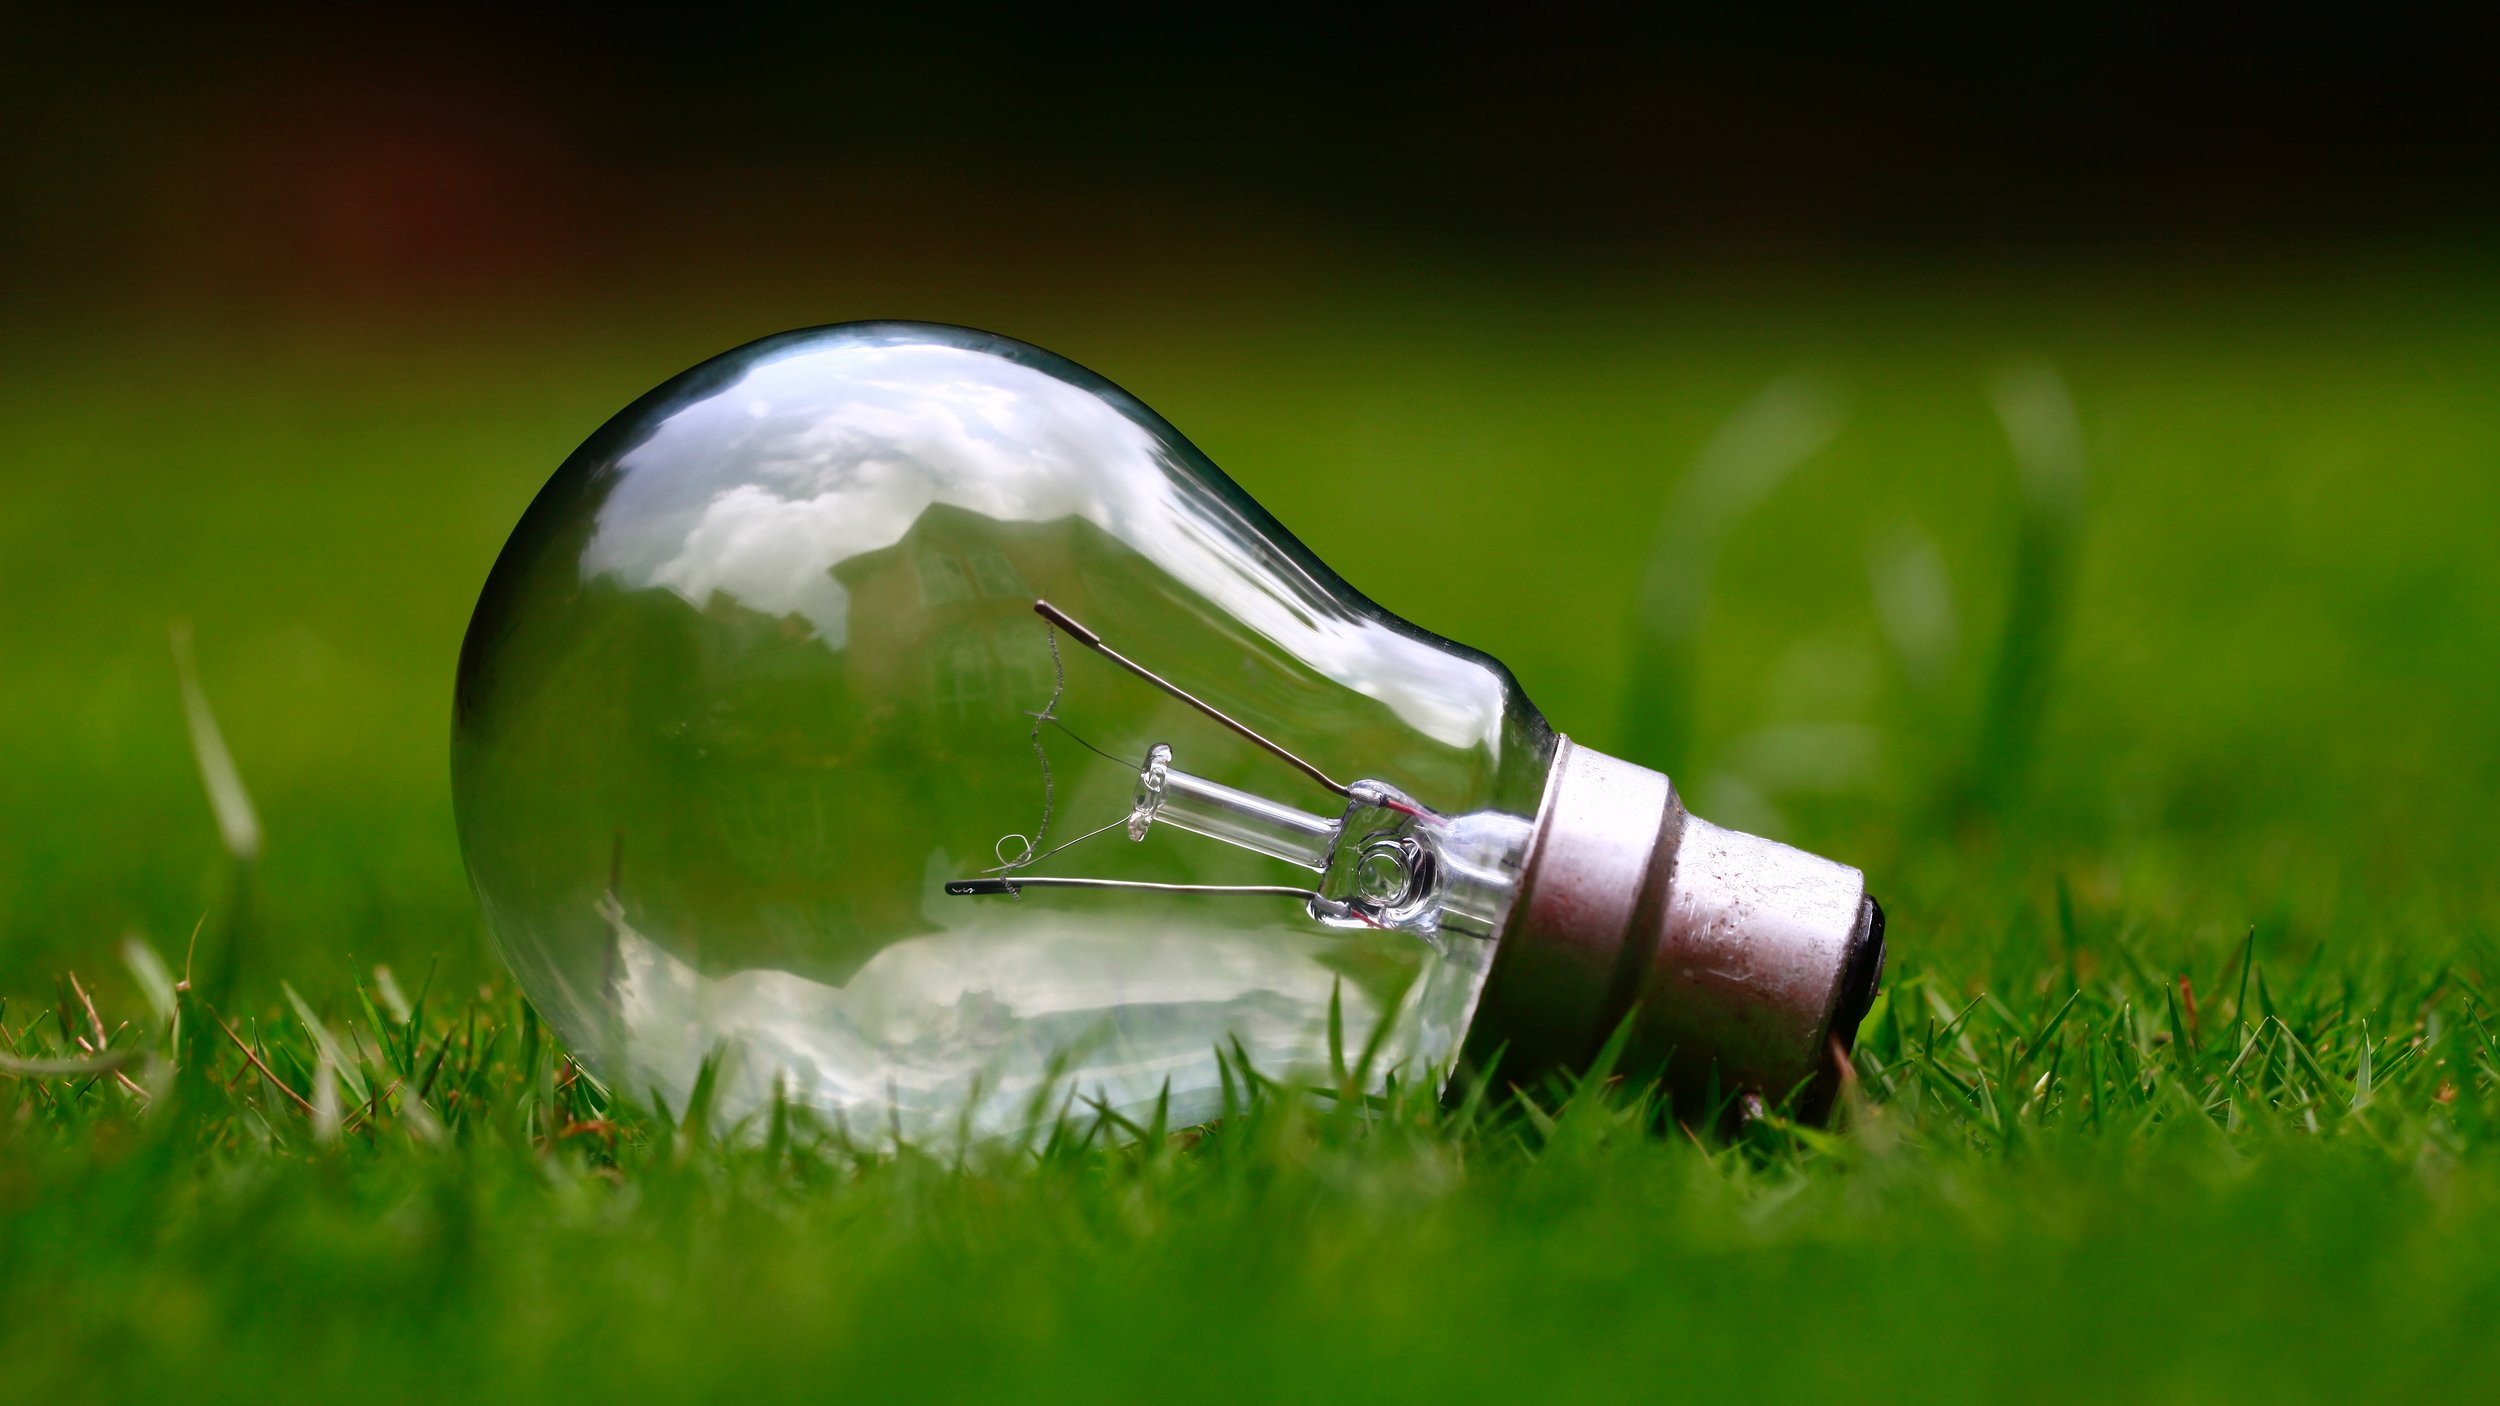  Saving energy today for a brighter tomorrow.   Helping you go green is our bottom line    Learn More  